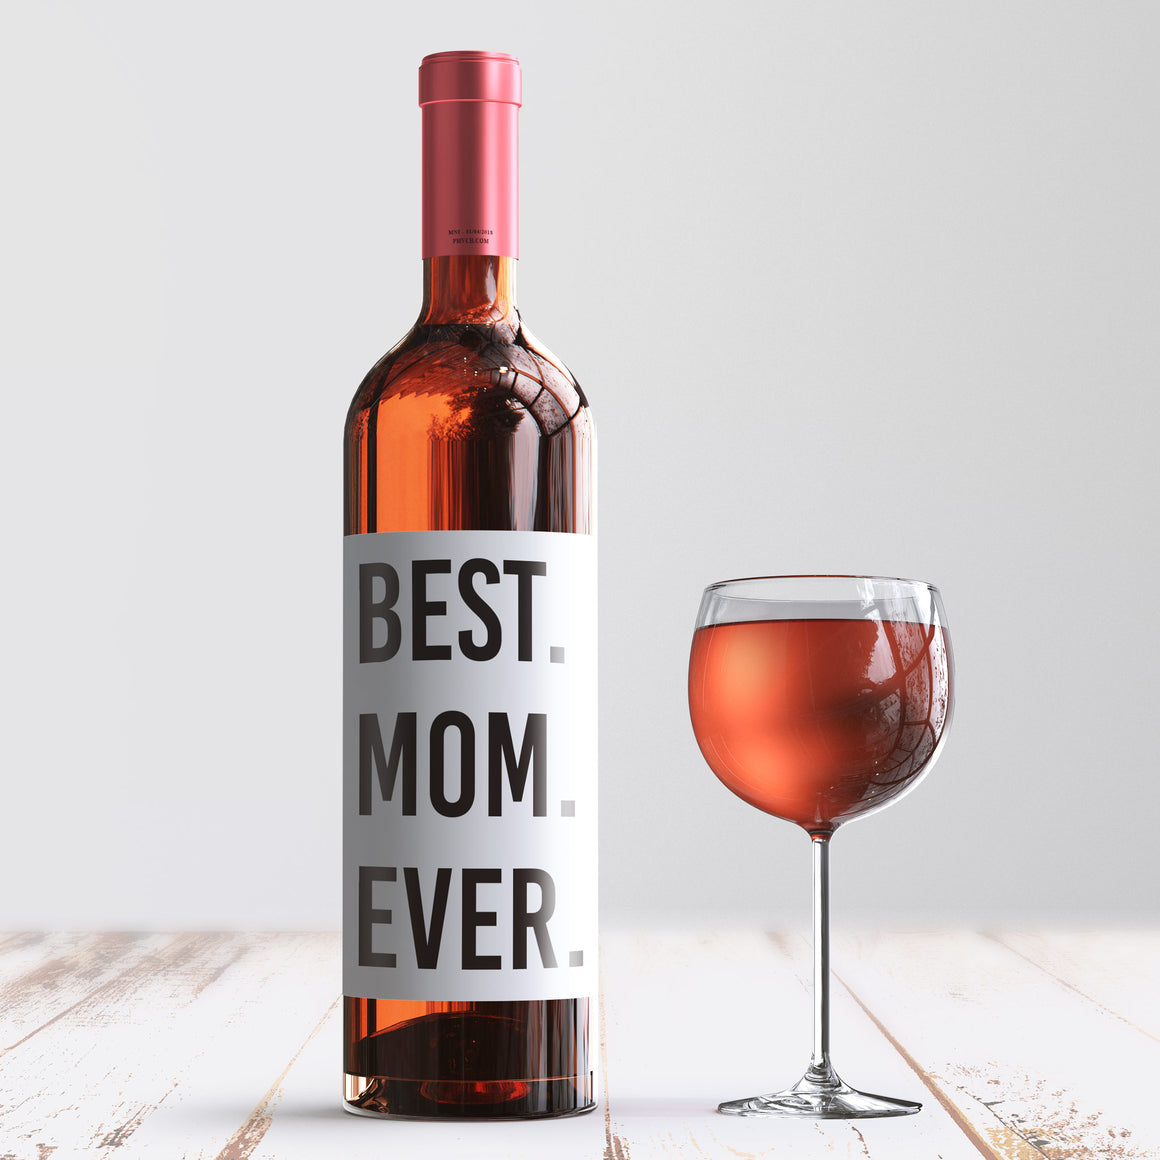 Best Mom Ever Mother's Day Wine Label + Card